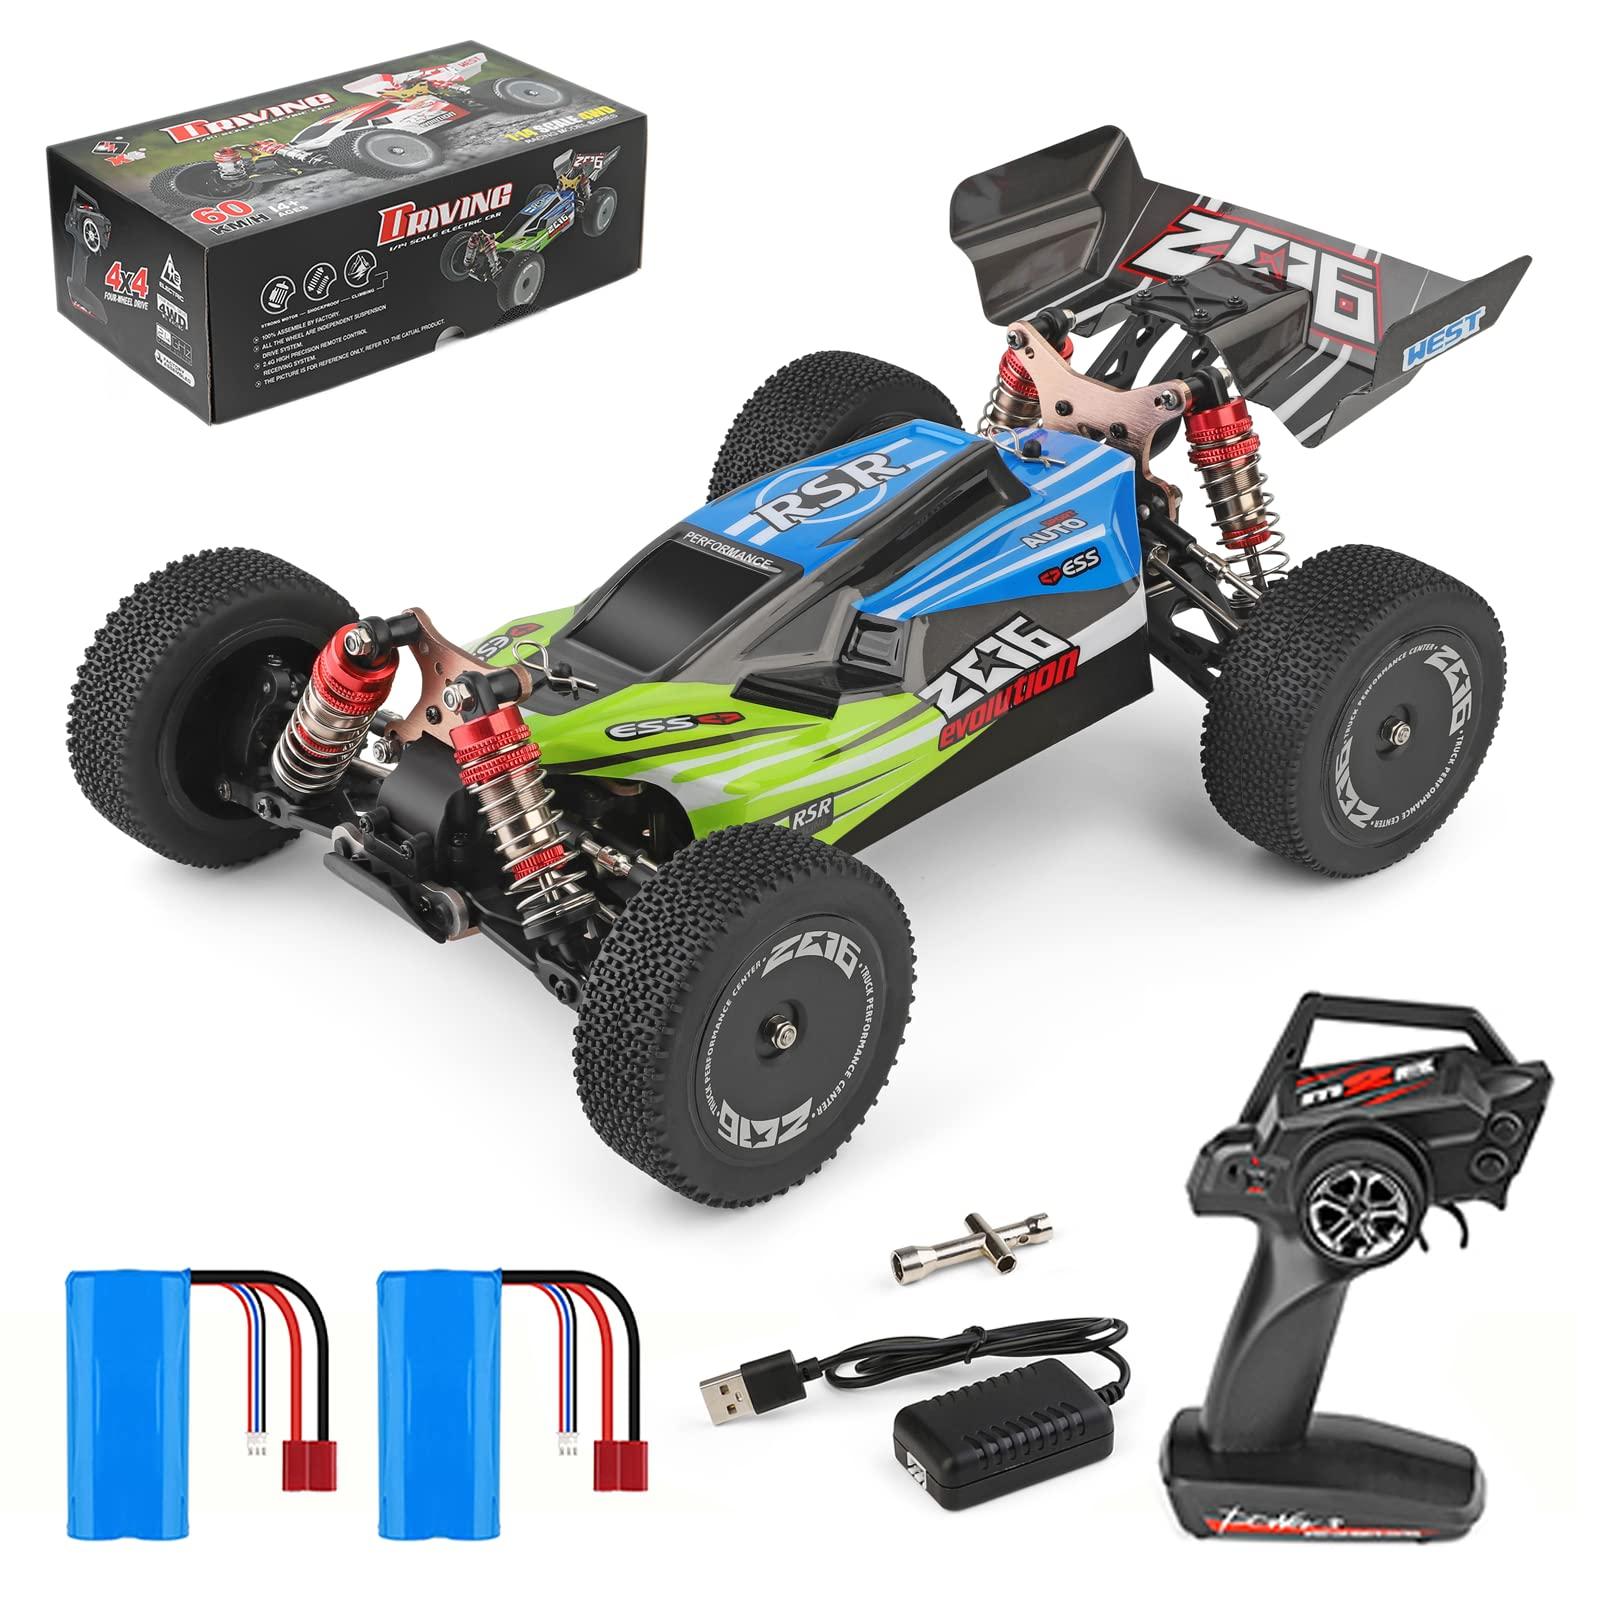 Driving 1/14 Scale Electric Car: Finding the Perfect 1/14 Scale Electric Car for Your Racing Needs